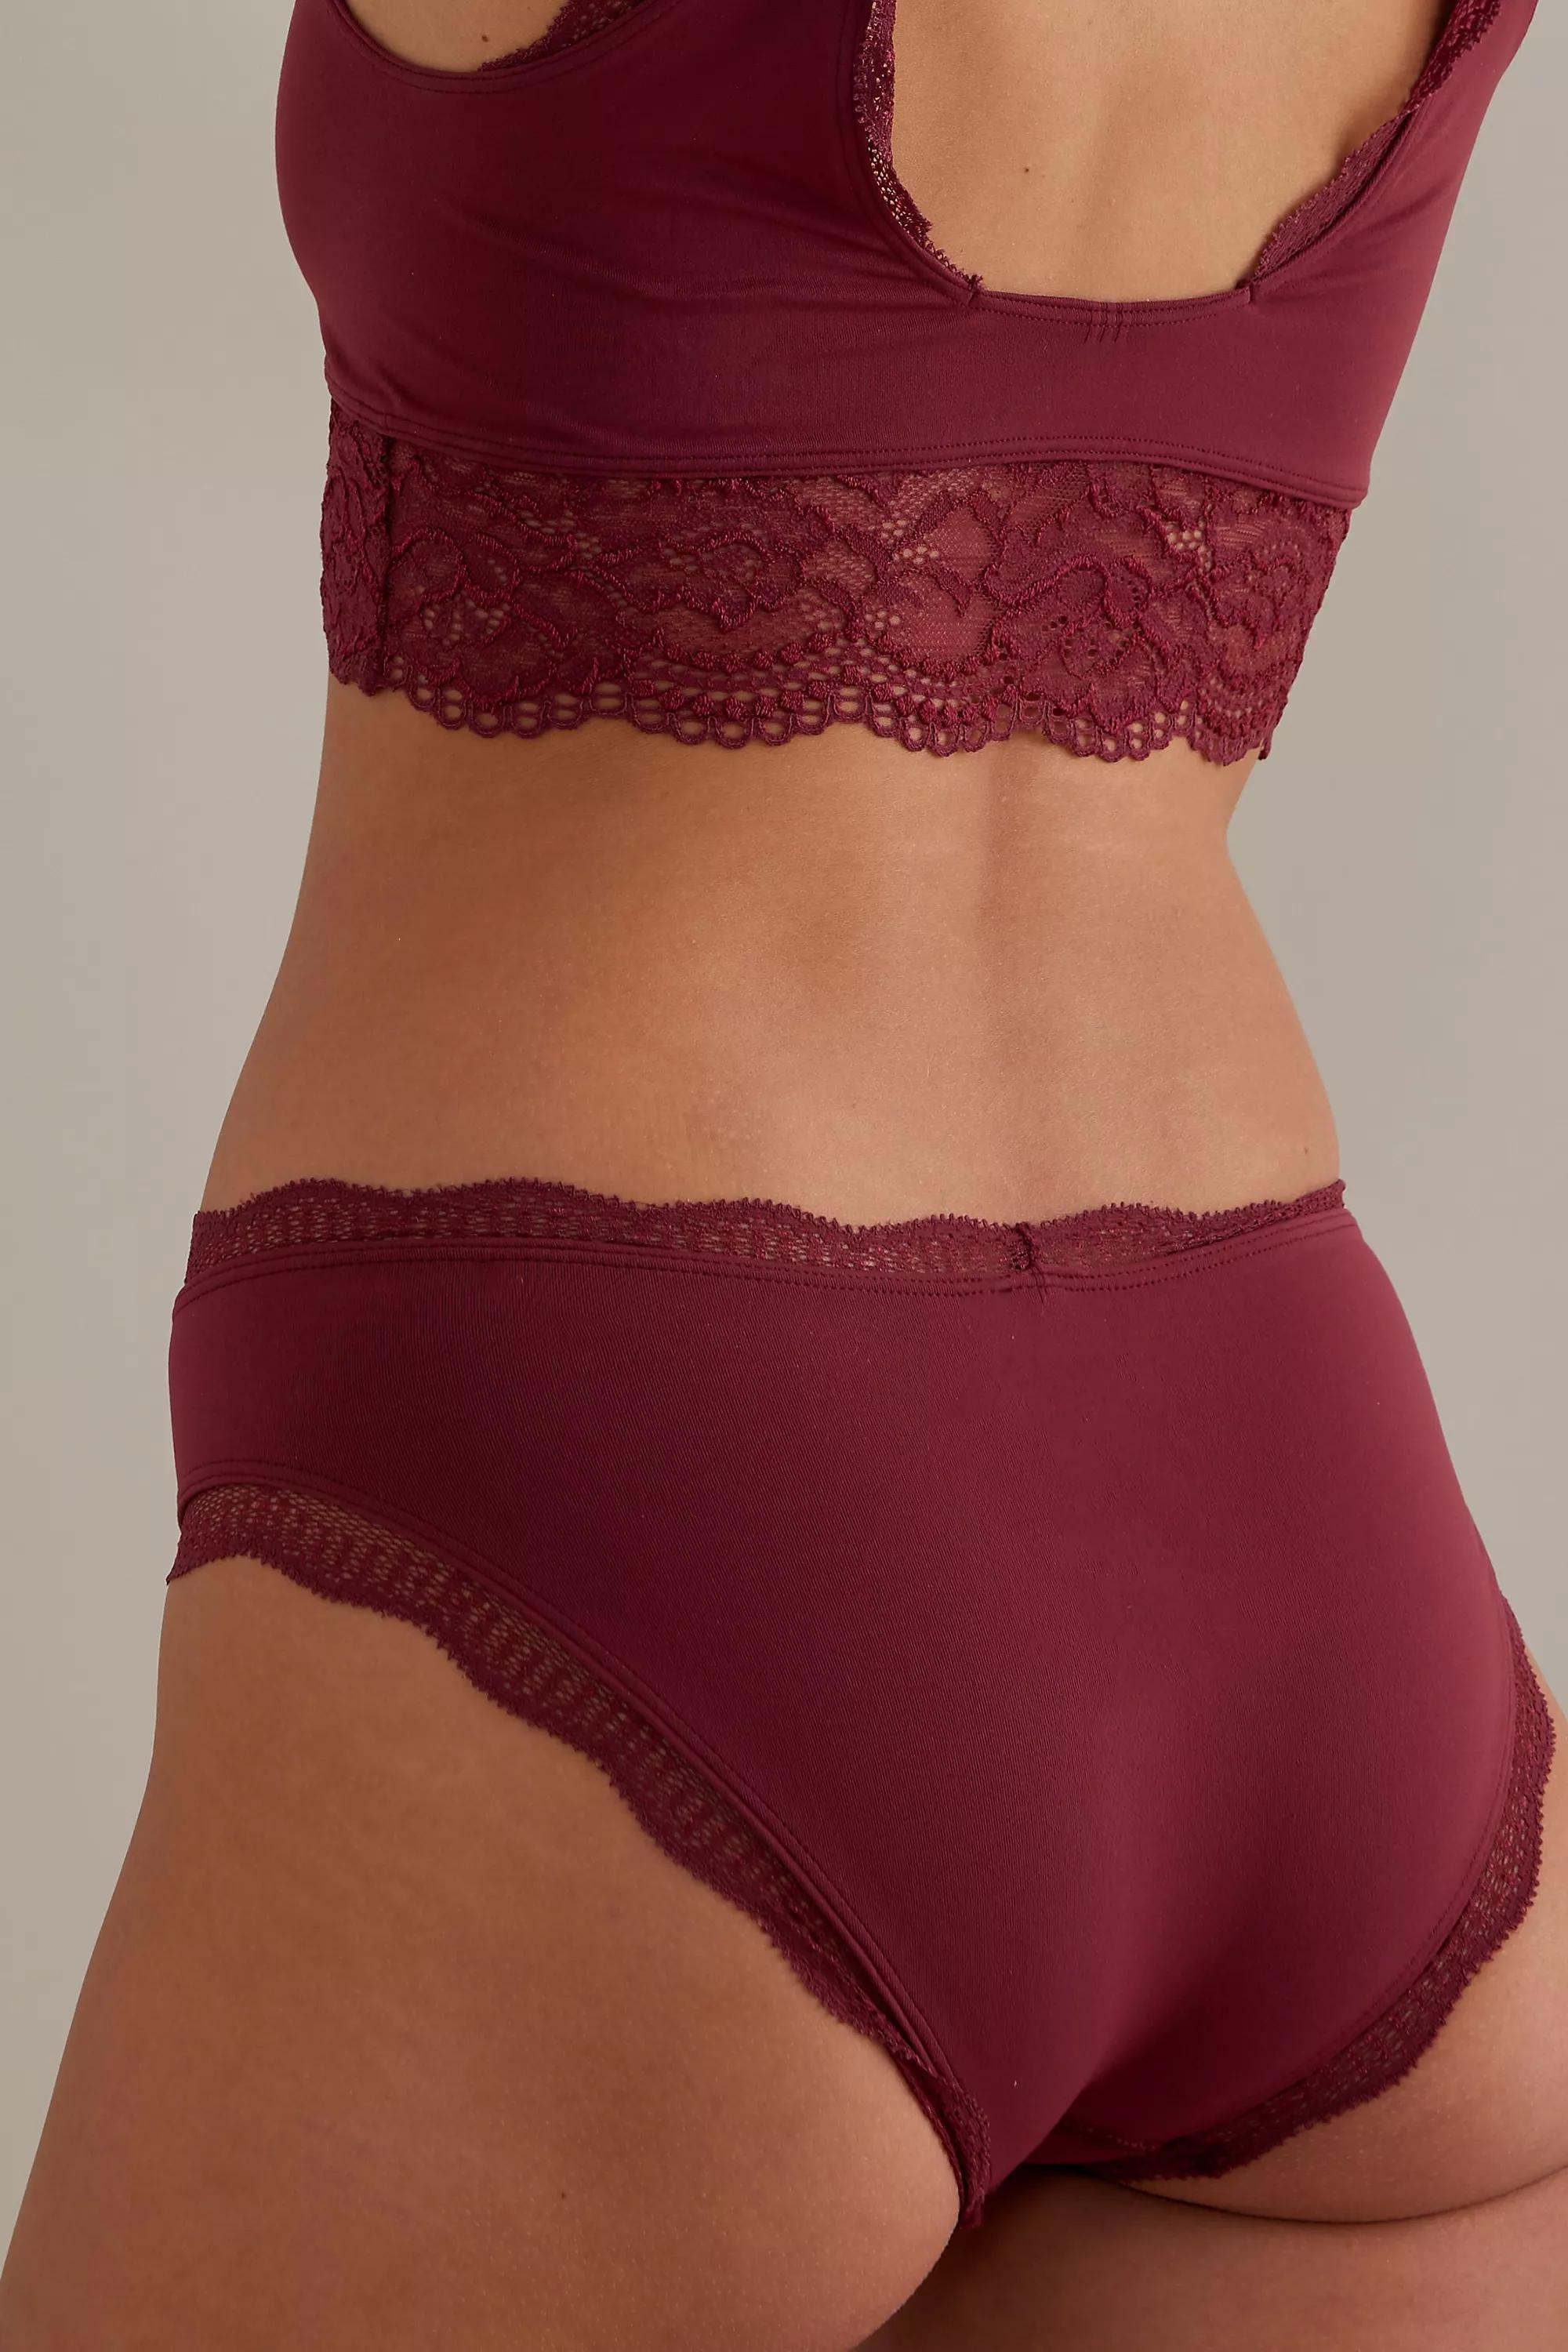 By Anthropologie Seamless Lace-Trim Briefs